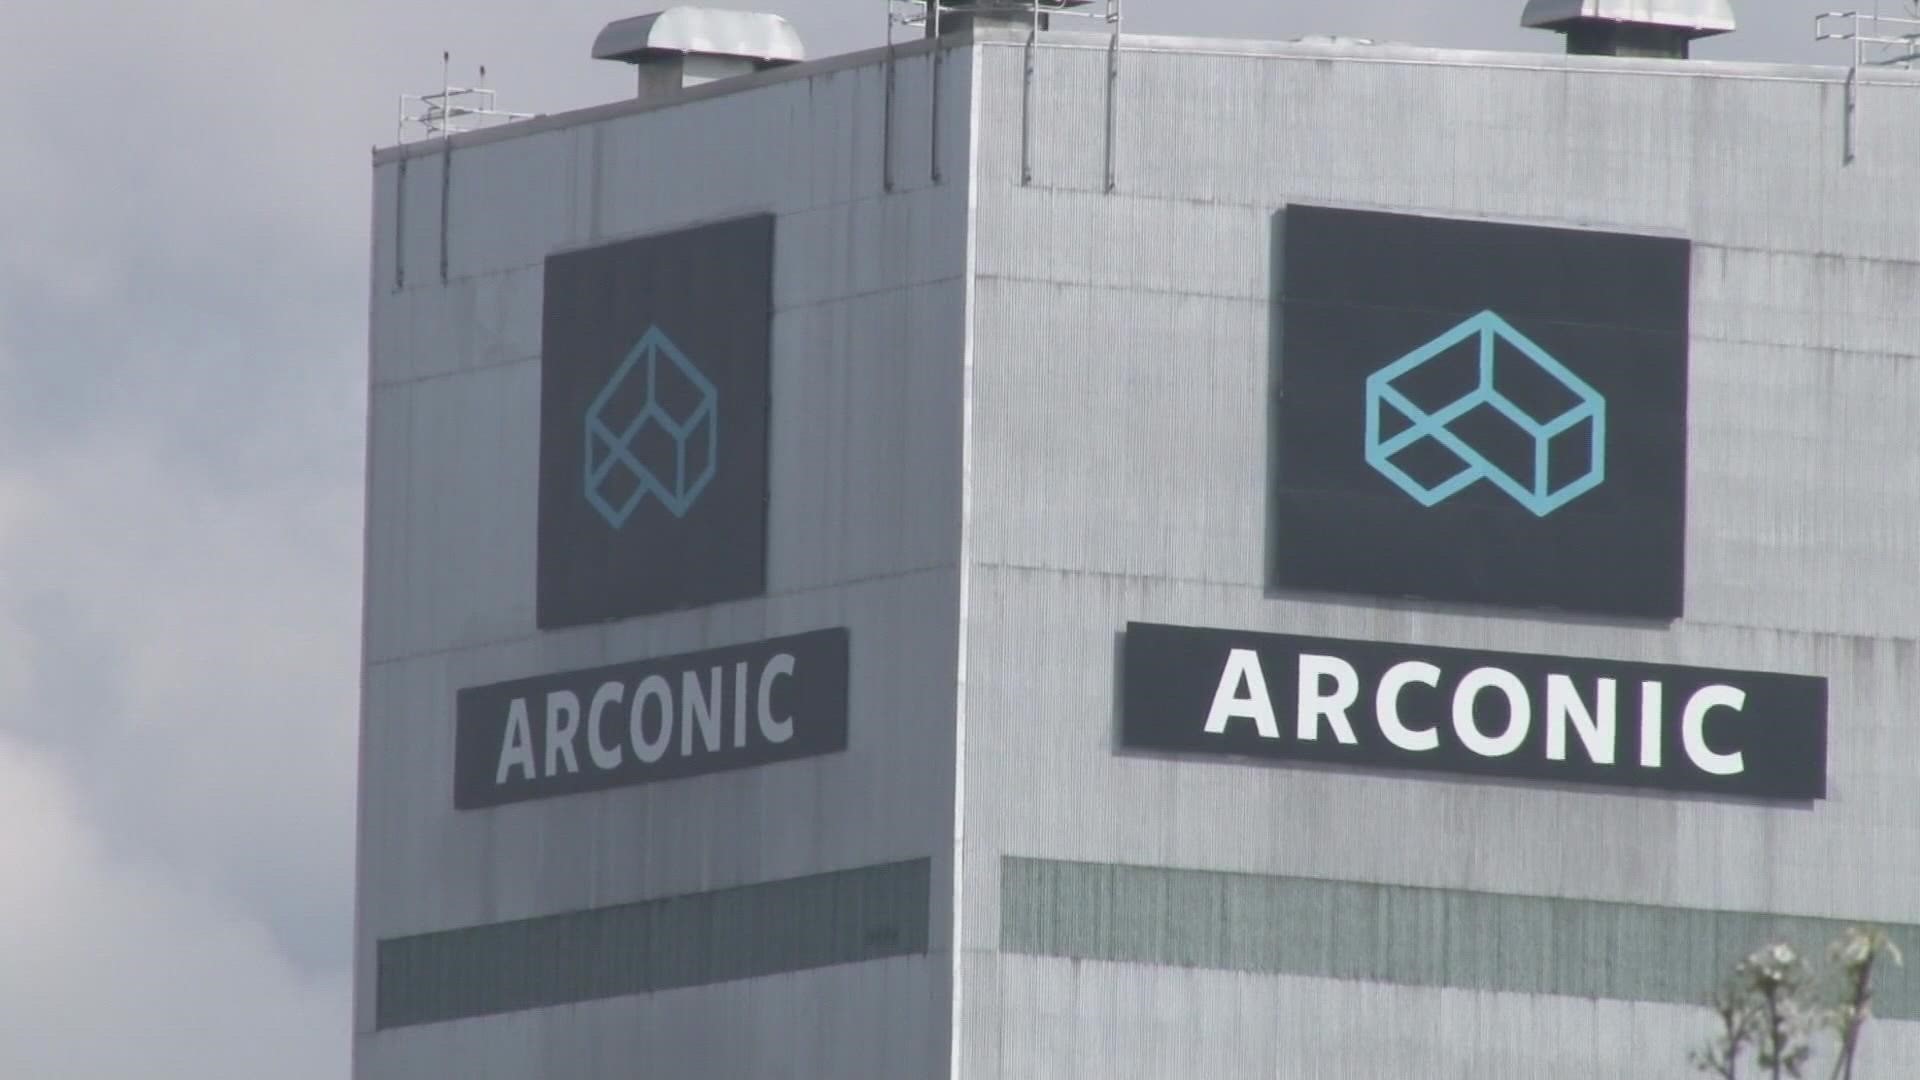 According to the report, Arconic invested around $100 million in East Tennessee, and East Chemical invested around $250 million.